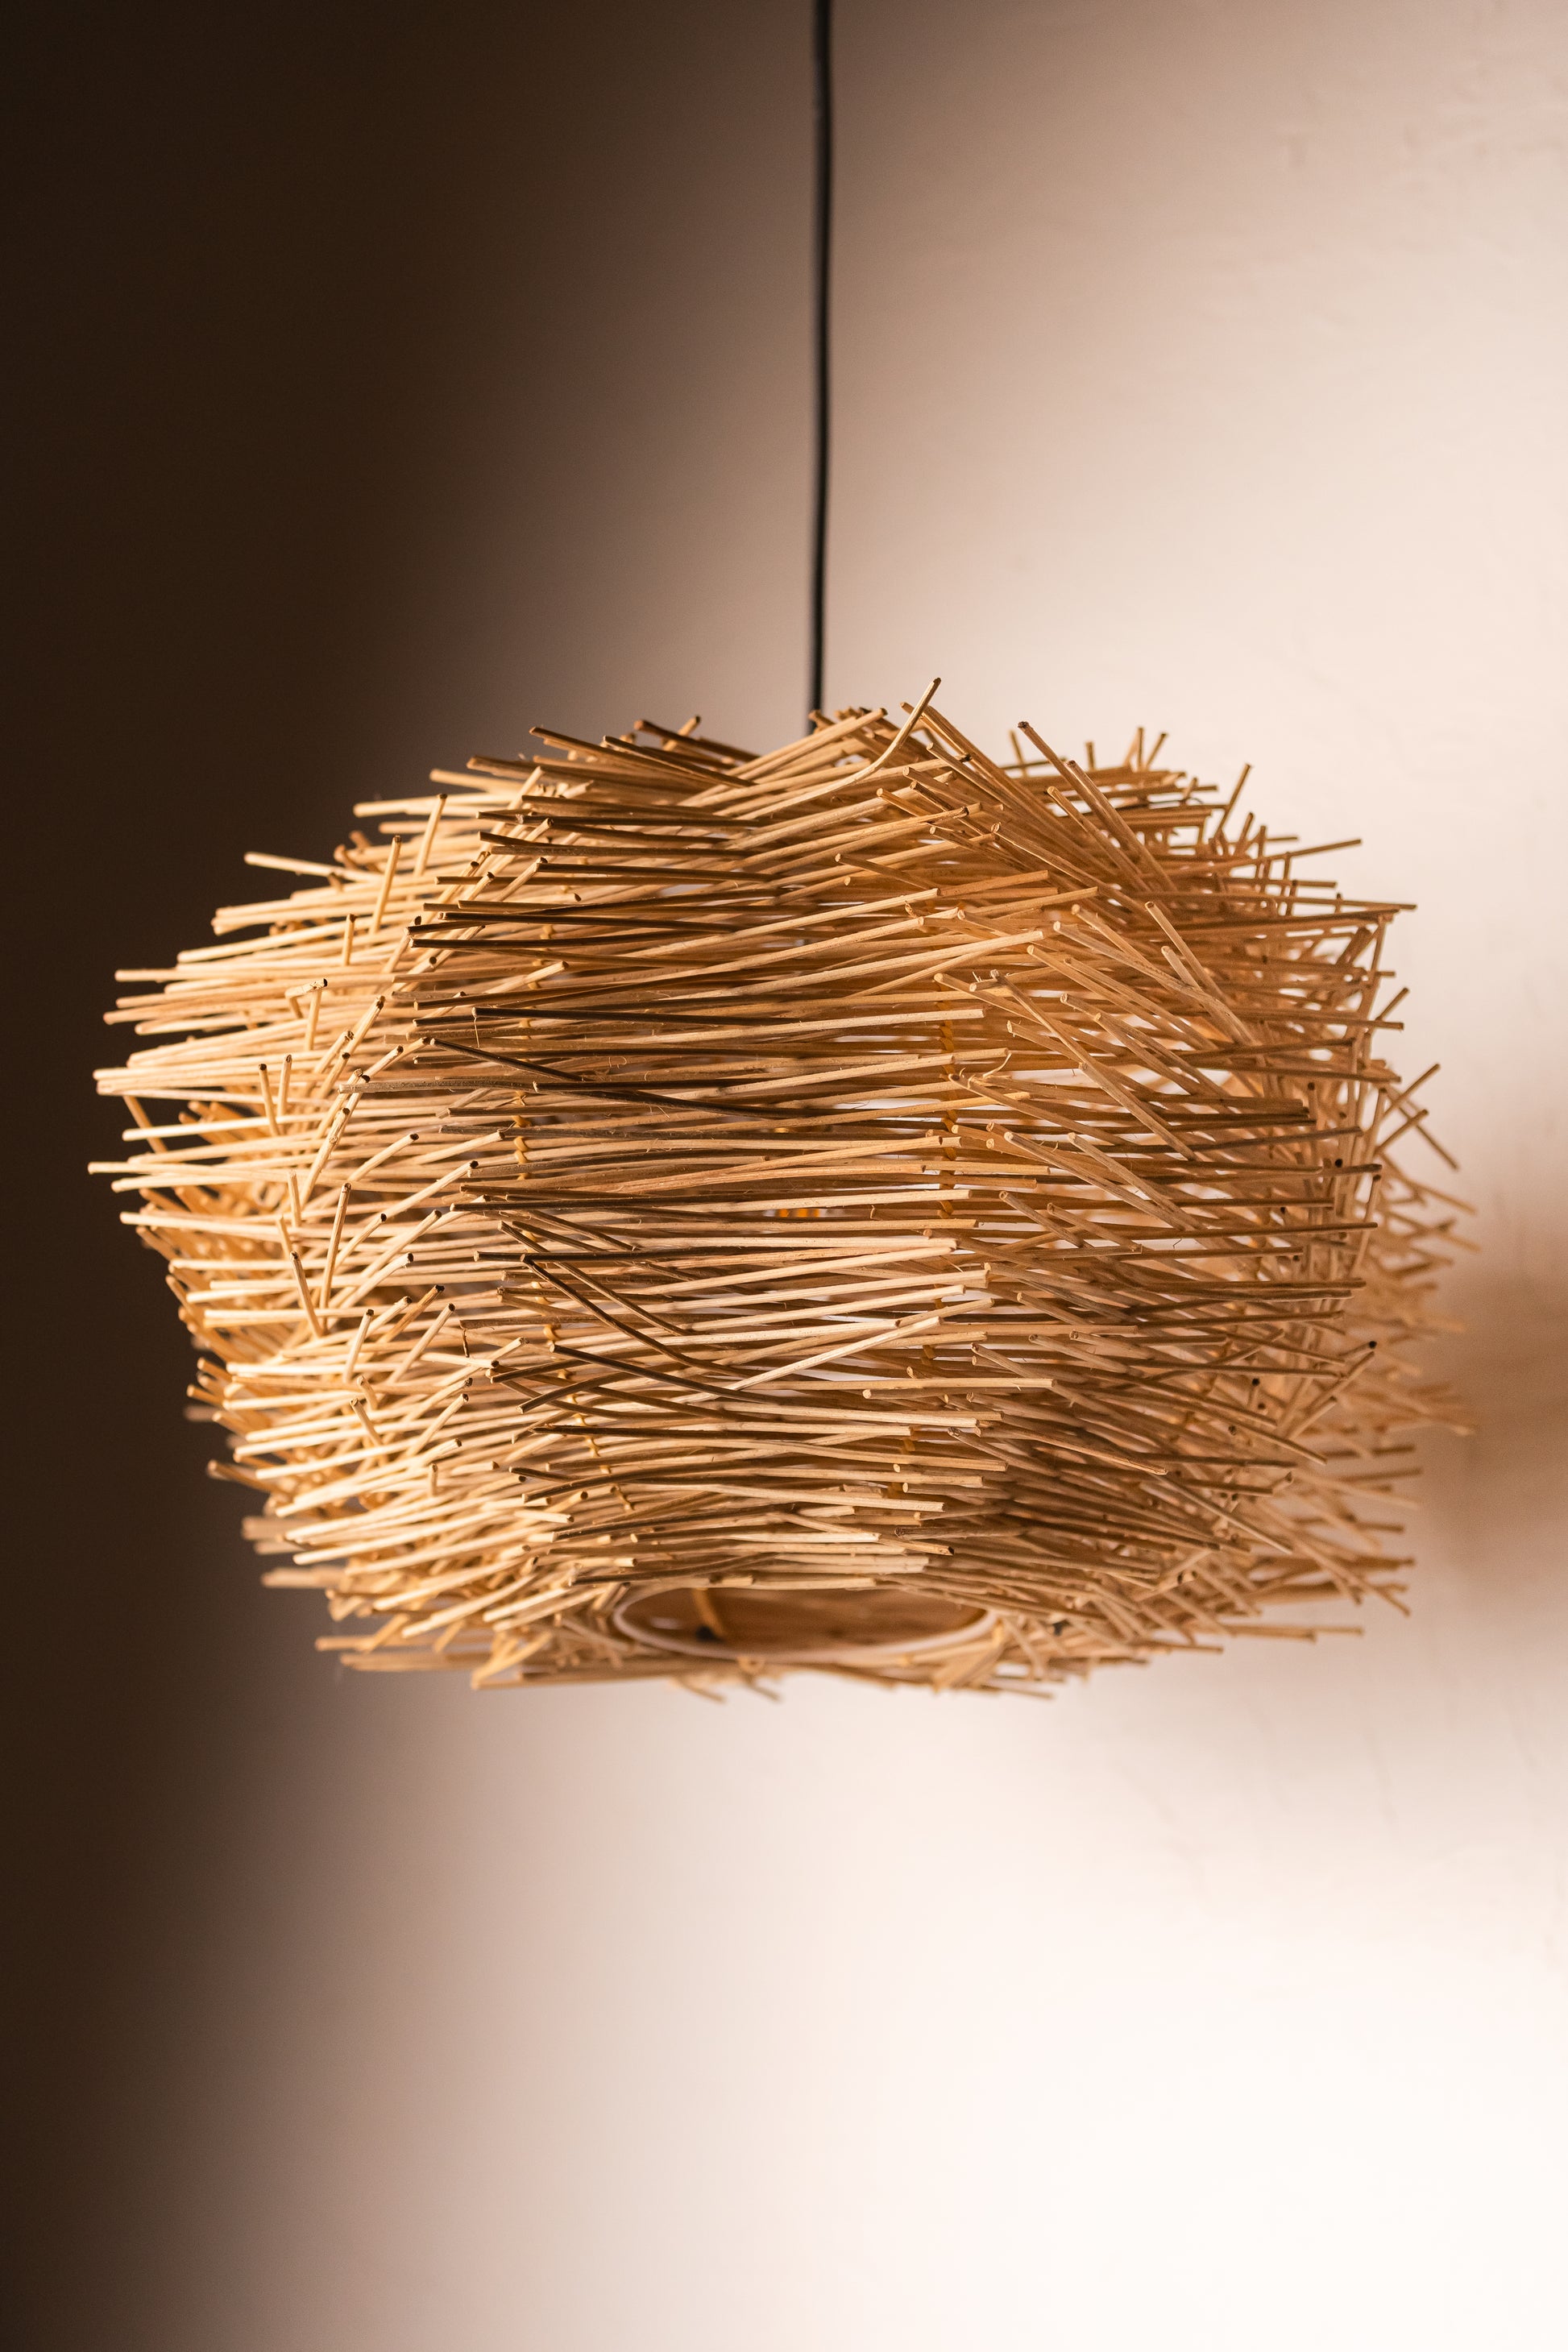 RATTAN ABSTRACT PENDANT LAMPSHADE  Abstract pendant lampshade, Artisan-made lampshade, Bedroom lighting solution, Bohemian pendant light, Child's room art, Coastal home décor, Covered patio lighting, Expertly crafted pendant, Handcrafted rattan pendant, Living space lighting, Quality rattan lighting, Rattan abstract pendant, Rustic pendant fixture, Versatile ceiling light, TESU